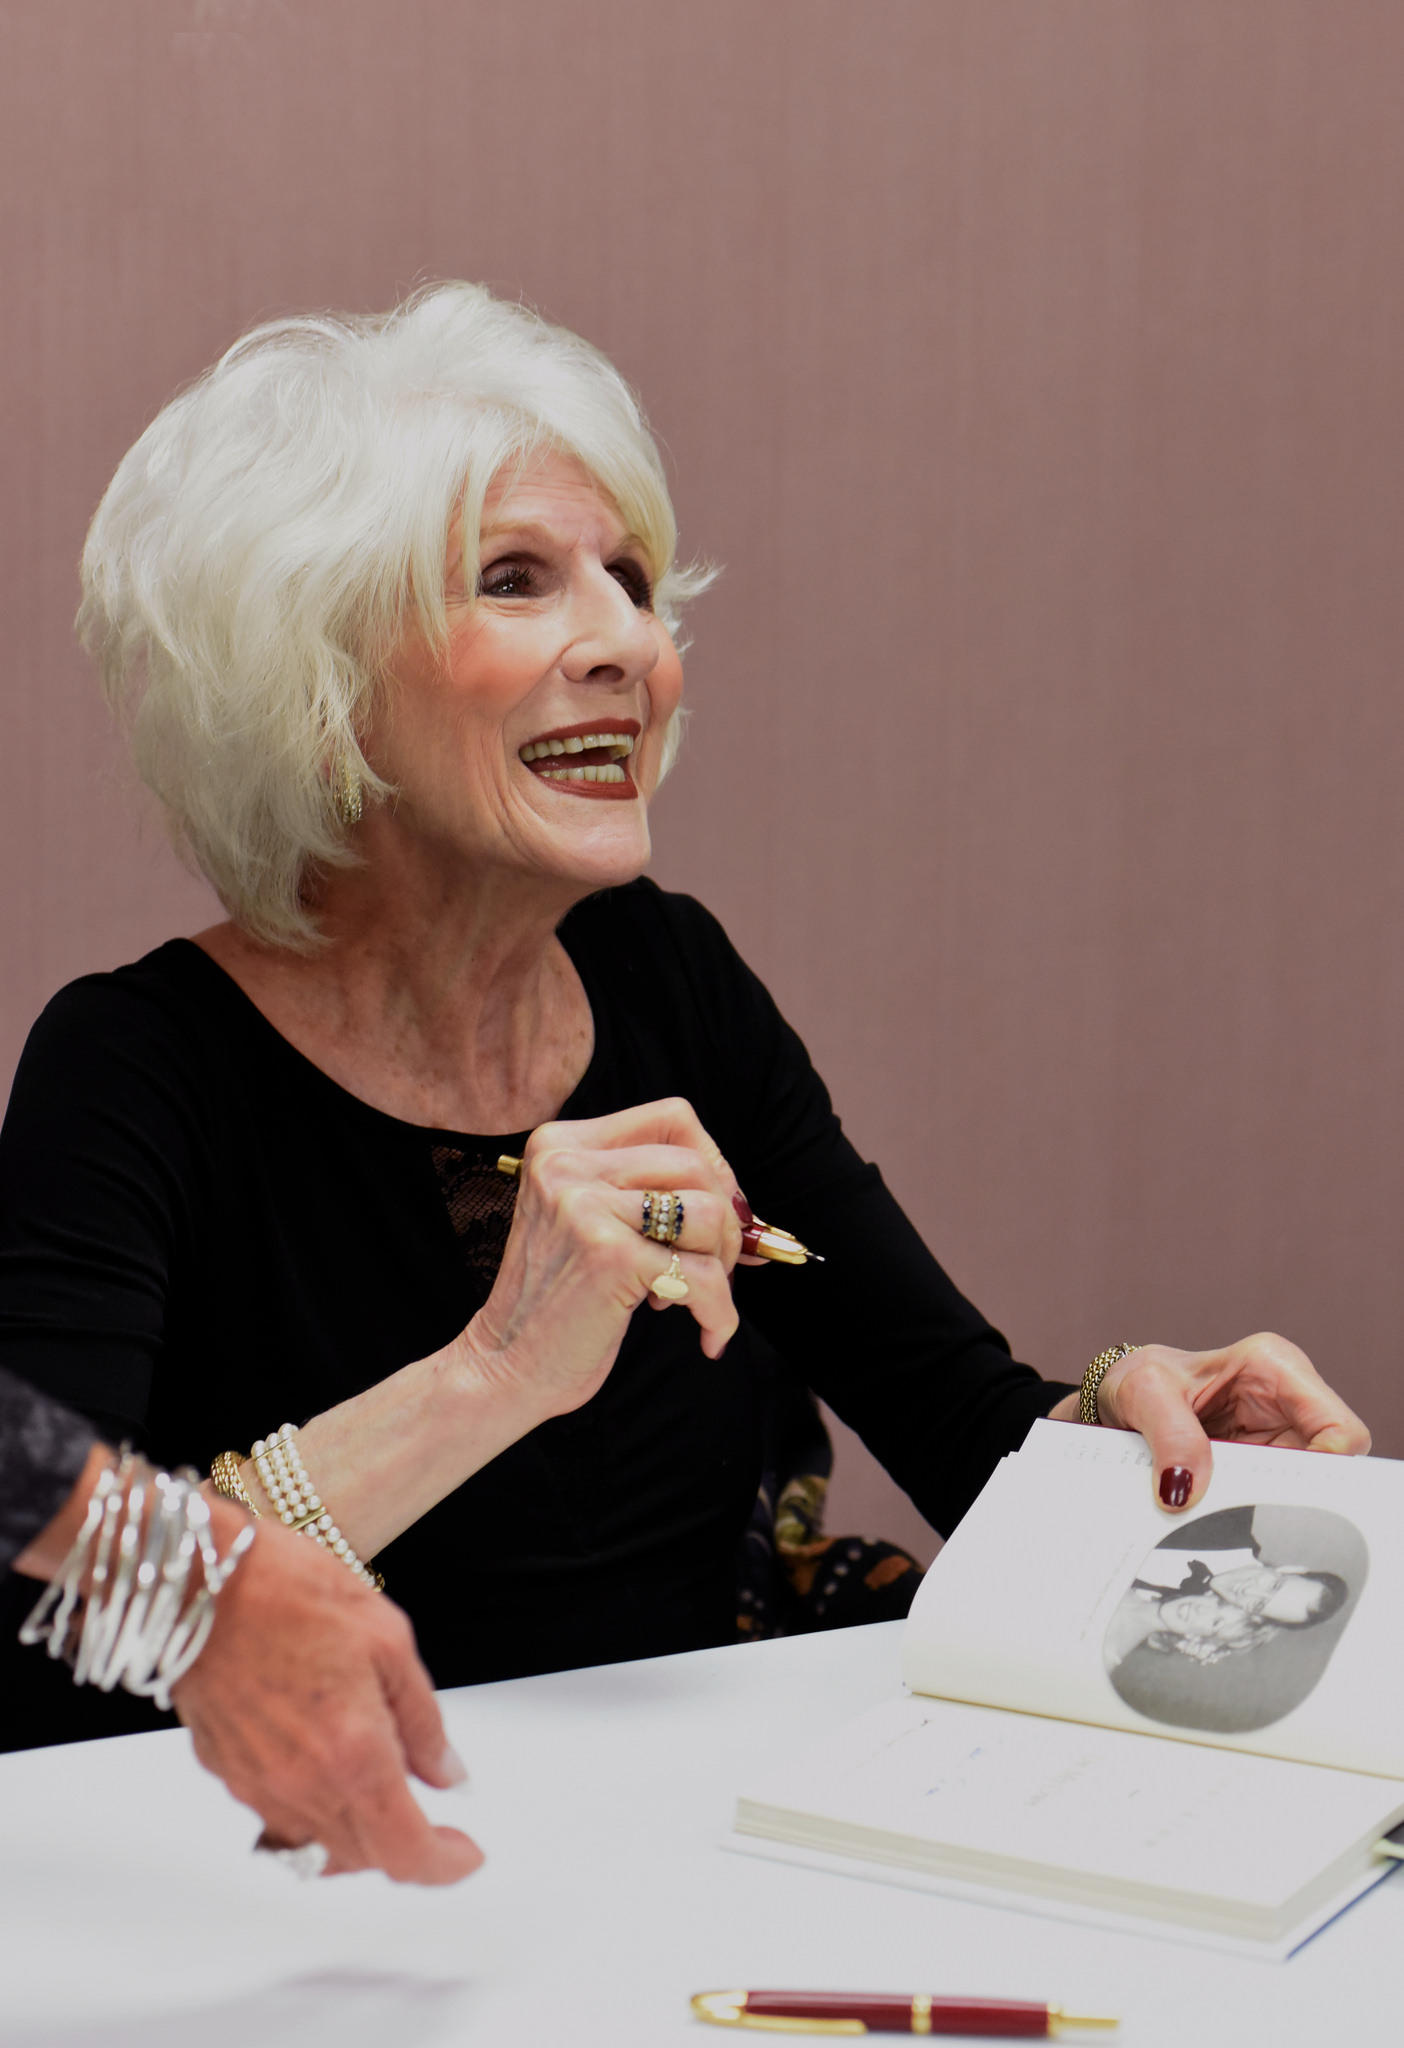 Diane Rehm Sits Down with Standing Room Only Crowd in St Louis St